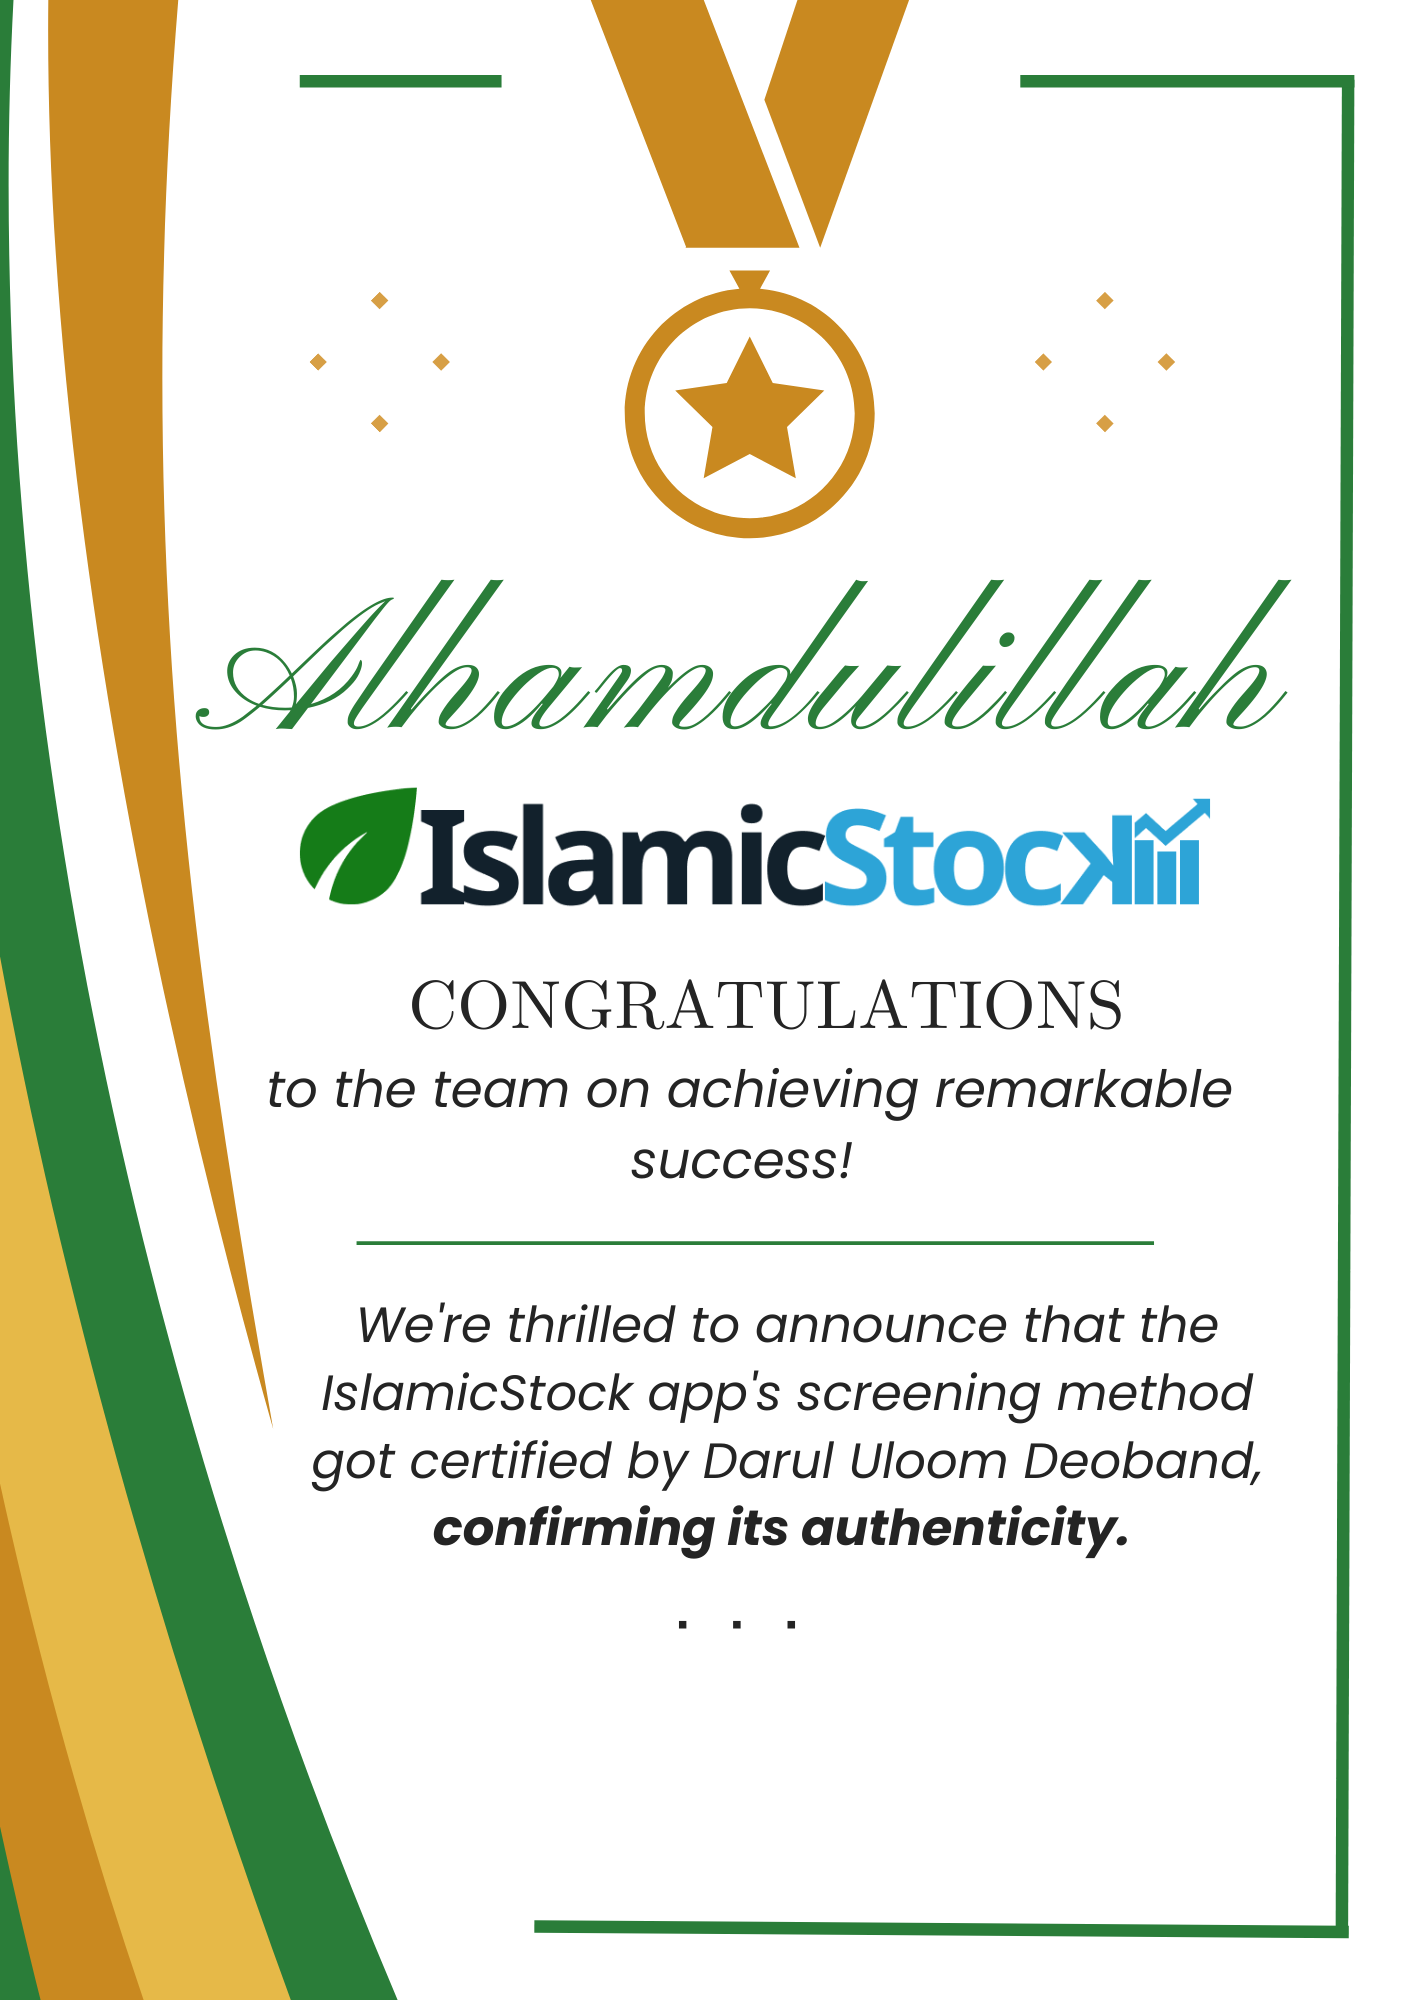 IslamicStock app's screening method got certified by Darul Uloom Deoband, confirming its authenticity. | IslamicStock blog